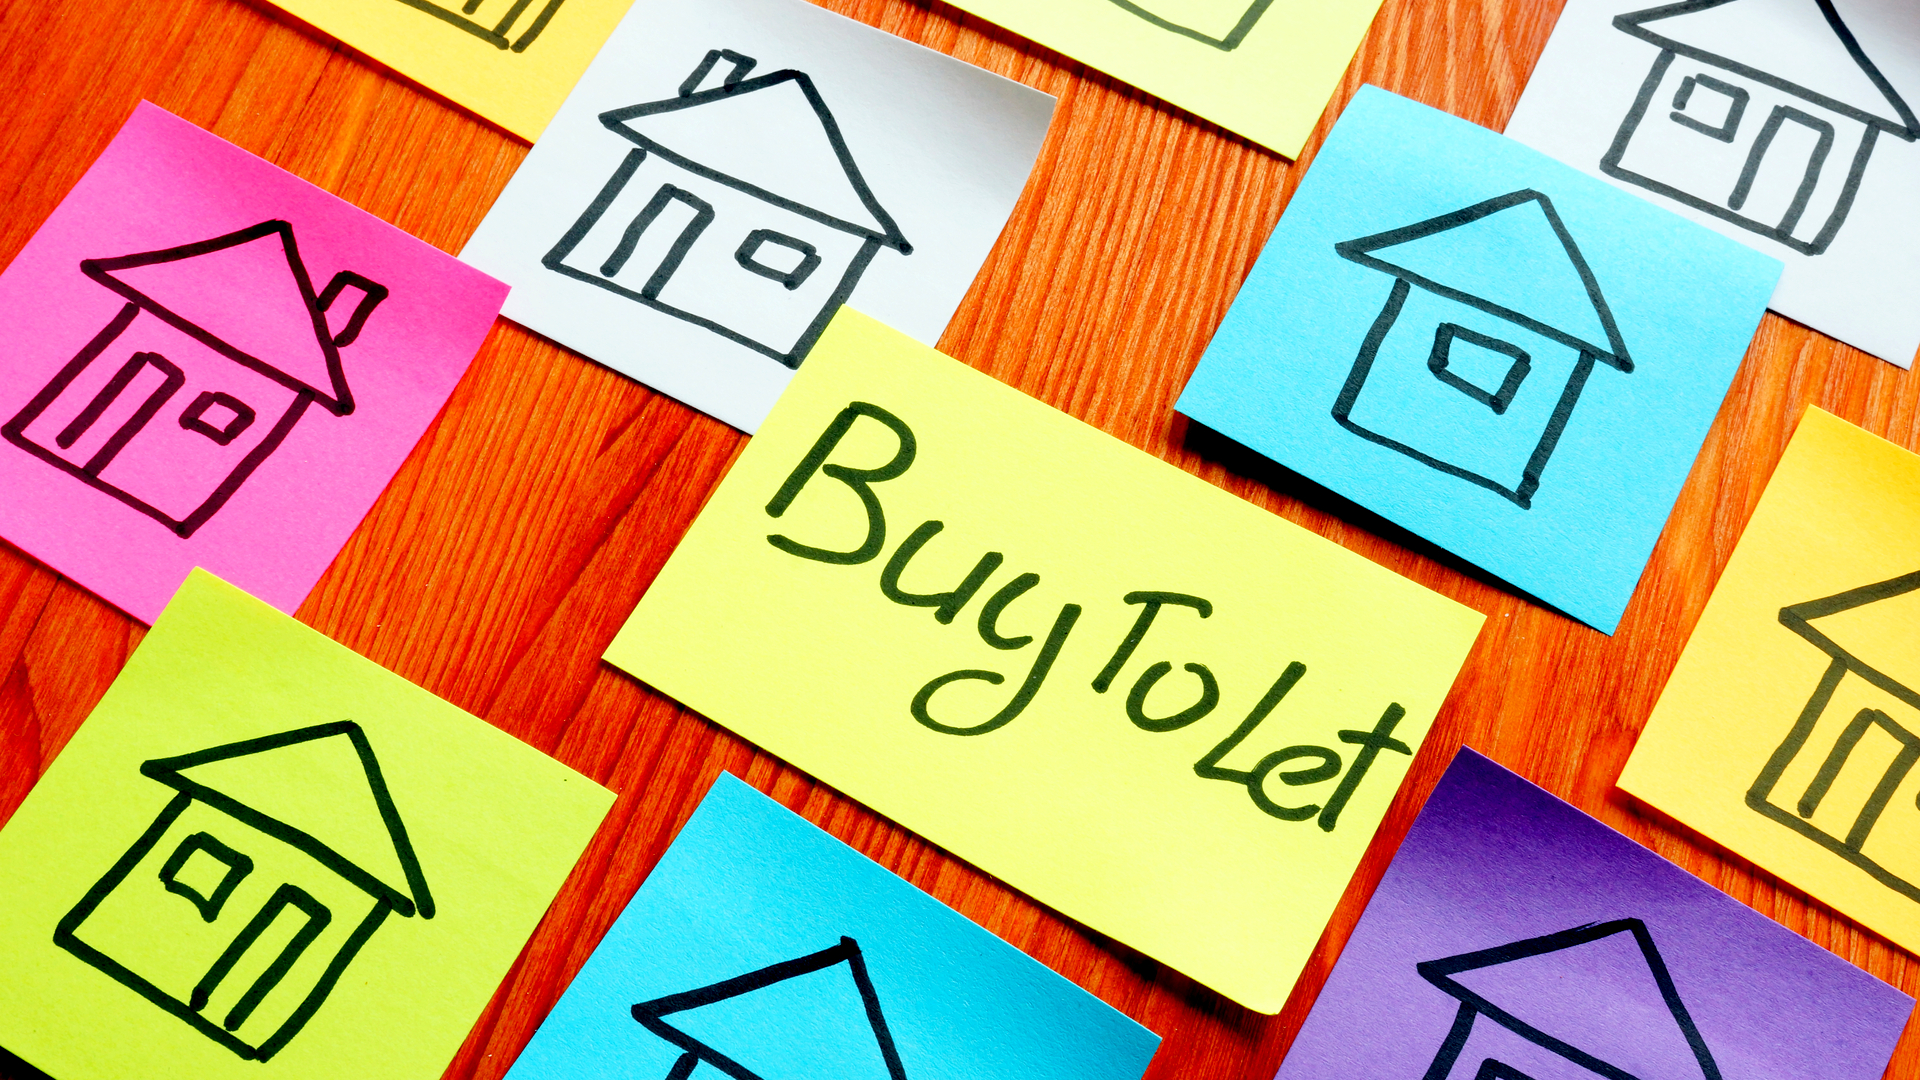 UK Buy to Let Investments - the perfect investment?